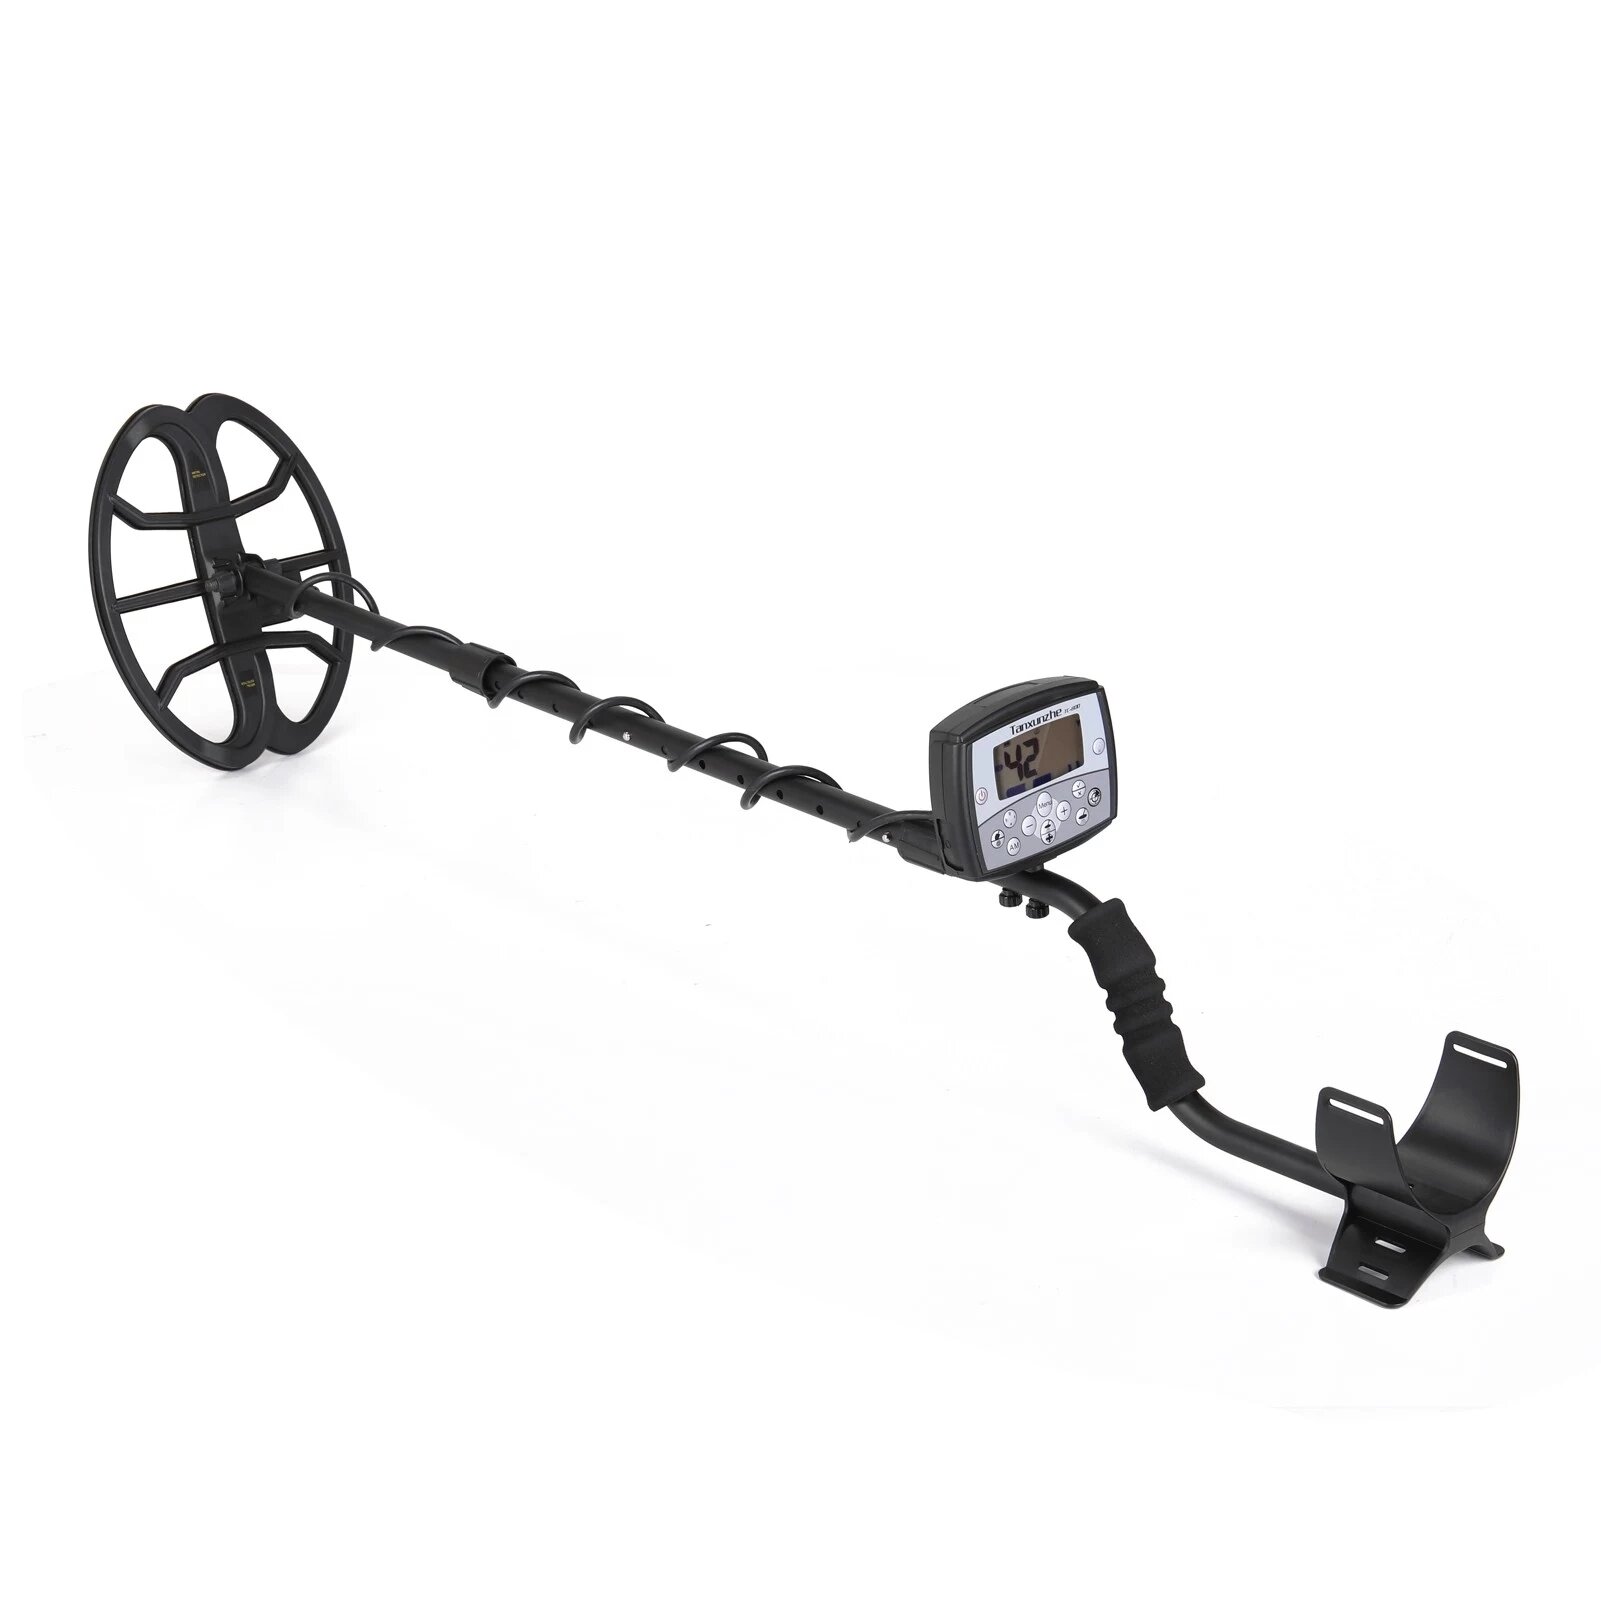 

TC-800 Multifunctional Underground Metal Detector High-Precision Digital Metal Detection Instrument for Adults And Child